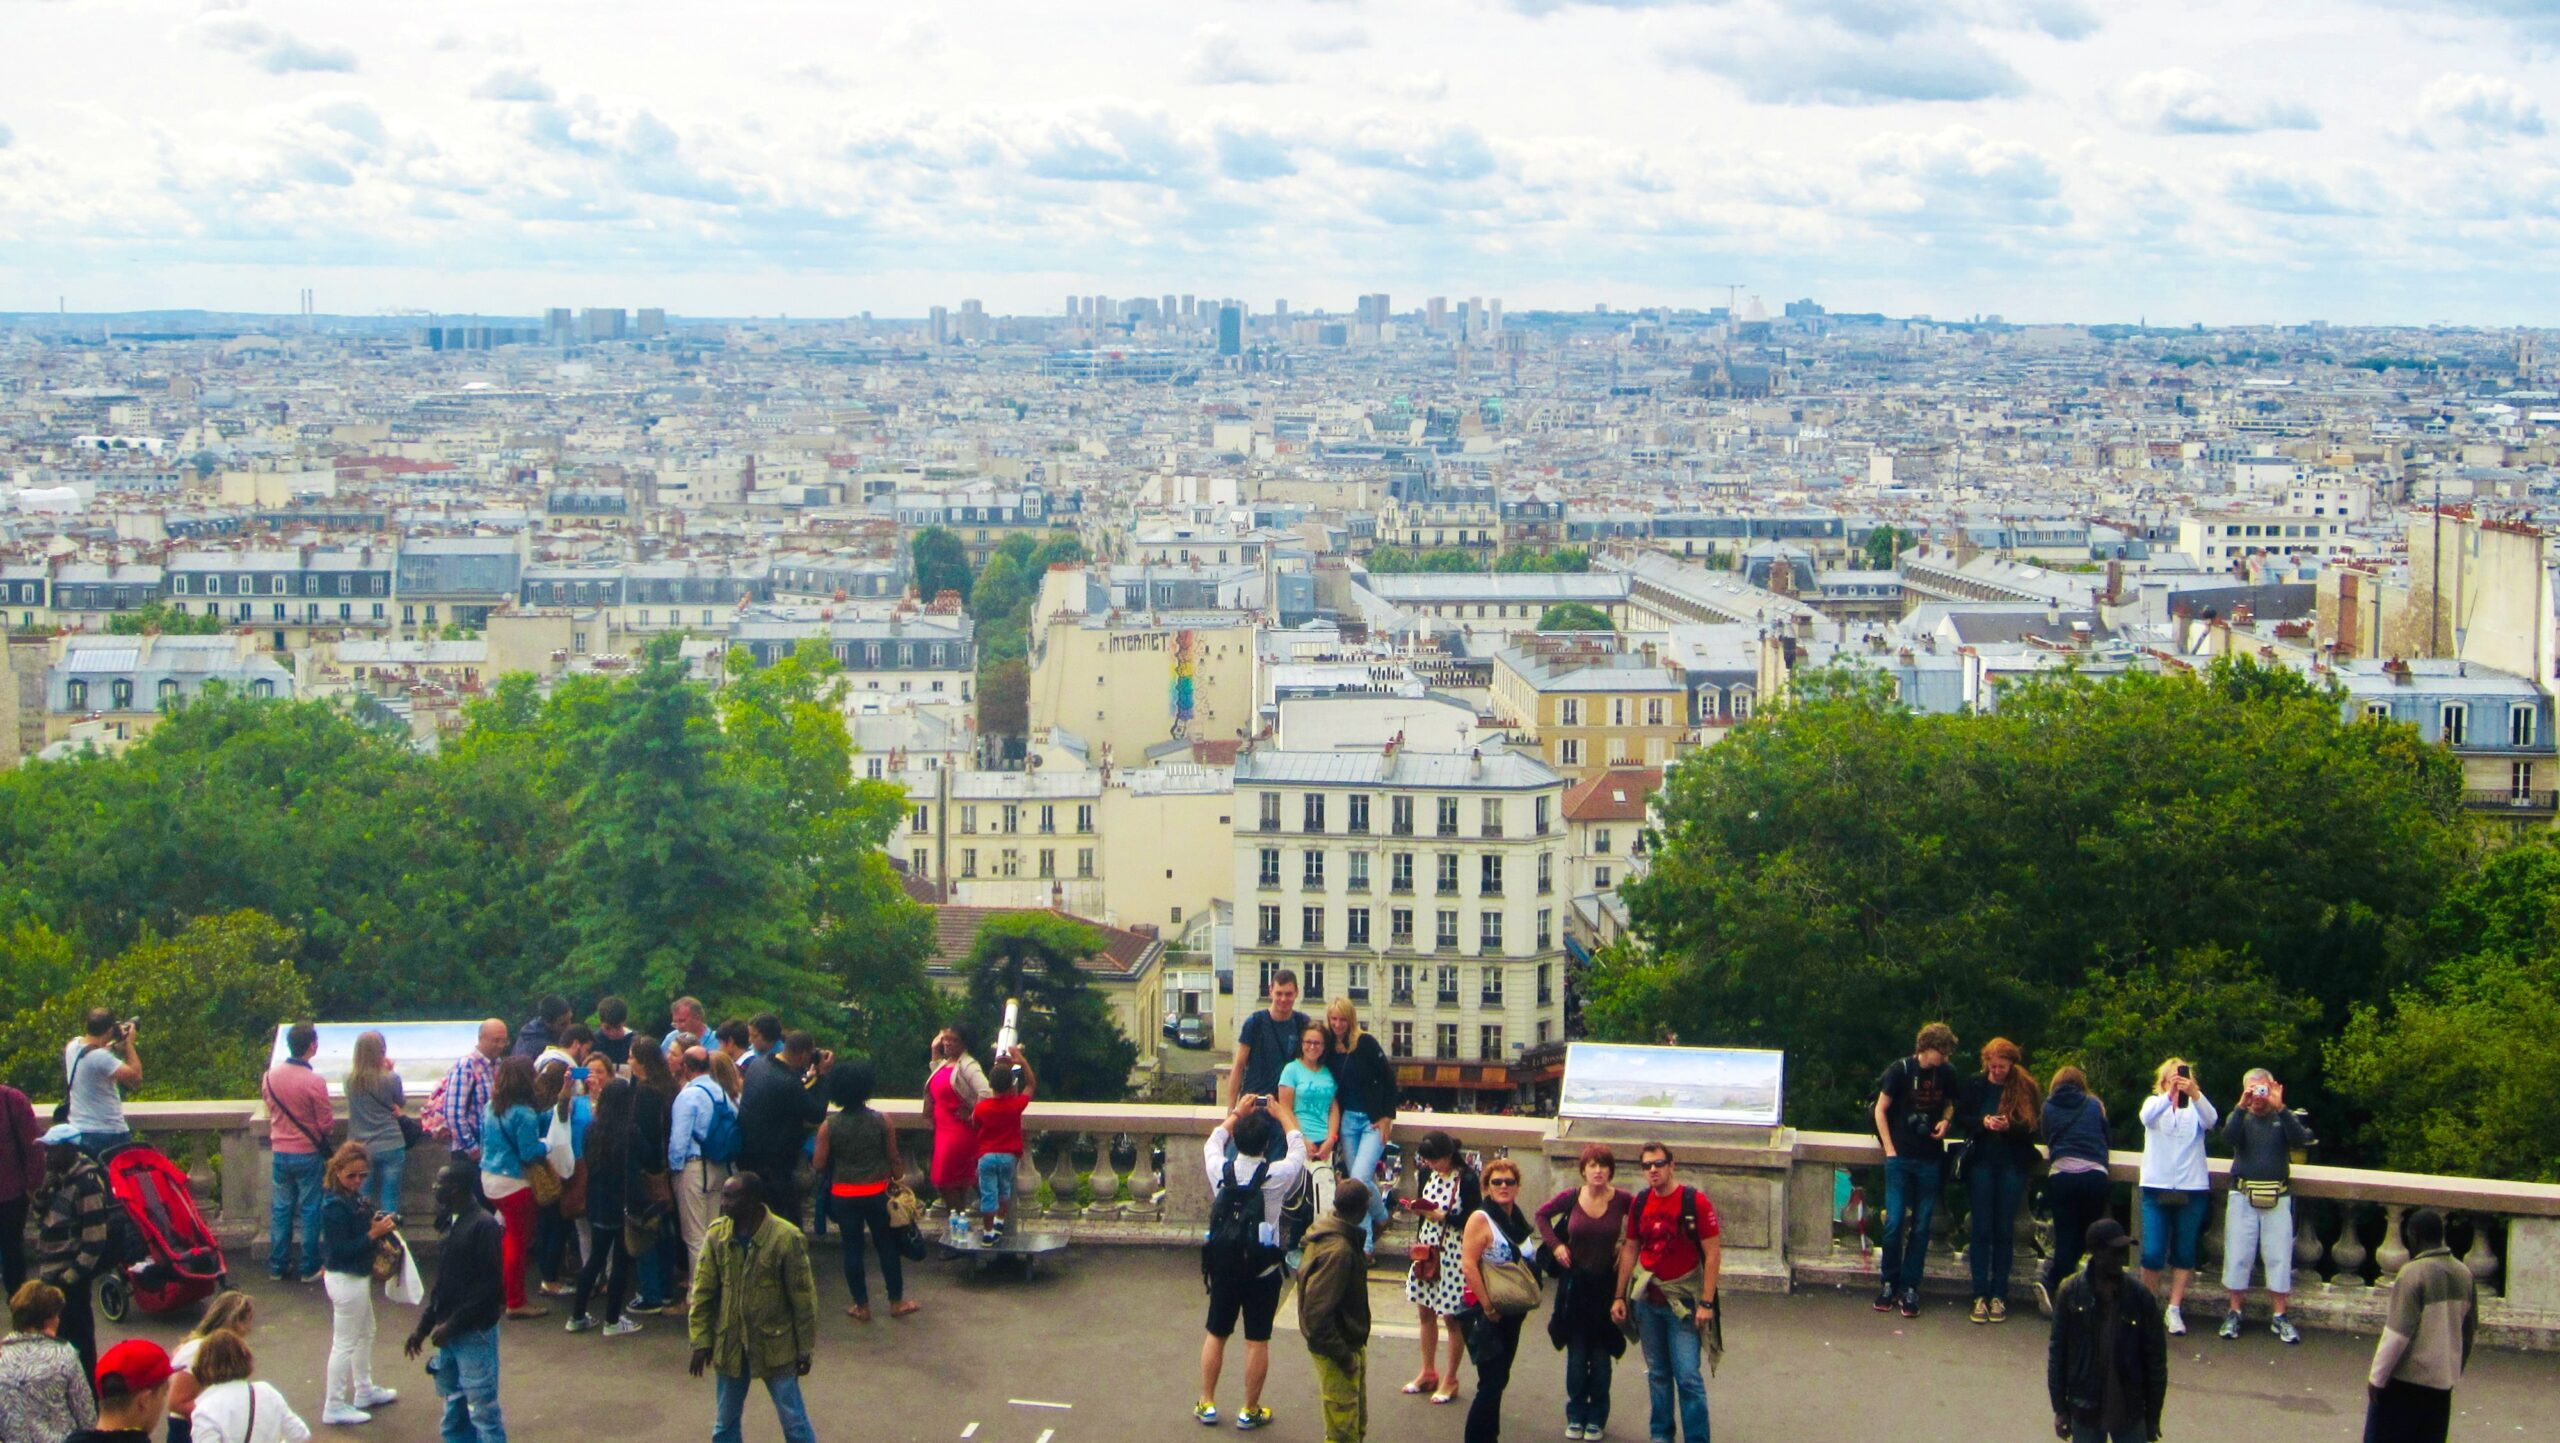 for a stellar view of paris without waiting in lines, head to the top of montmartre.